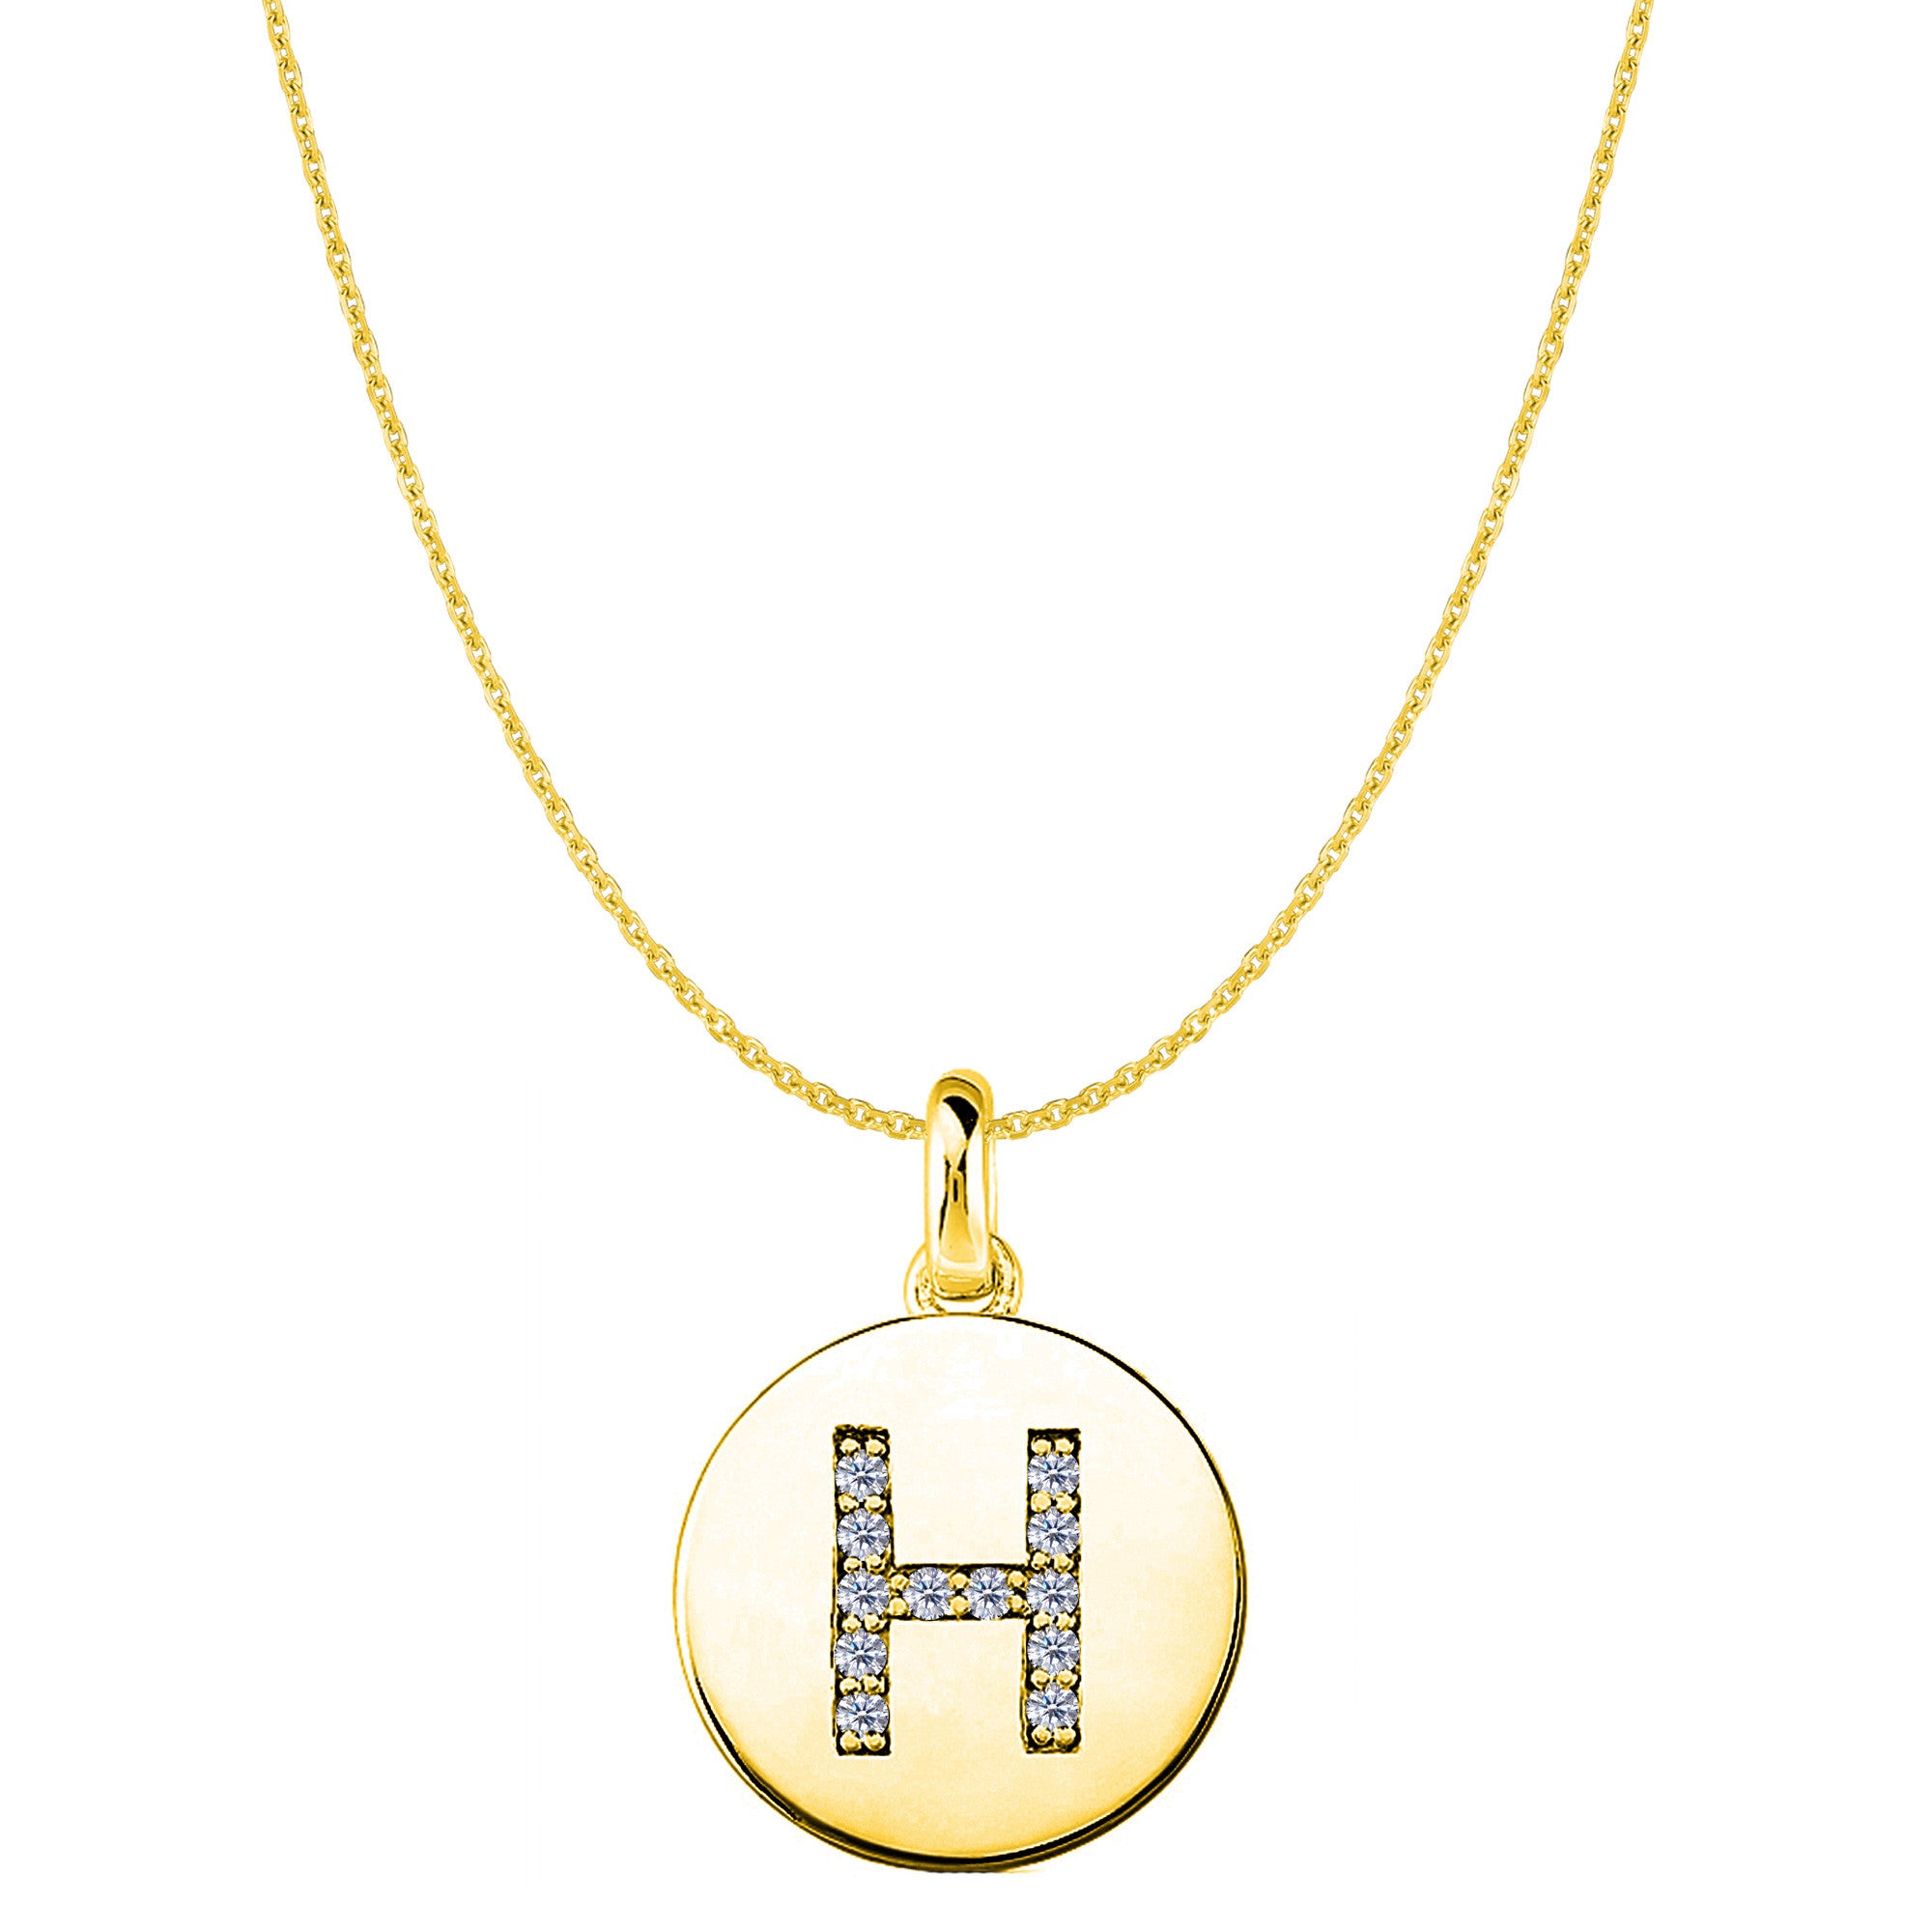 "H" Diamond Initial 14K Yellow Gold Disk Pendant (0.12ct) fine designer jewelry for men and women